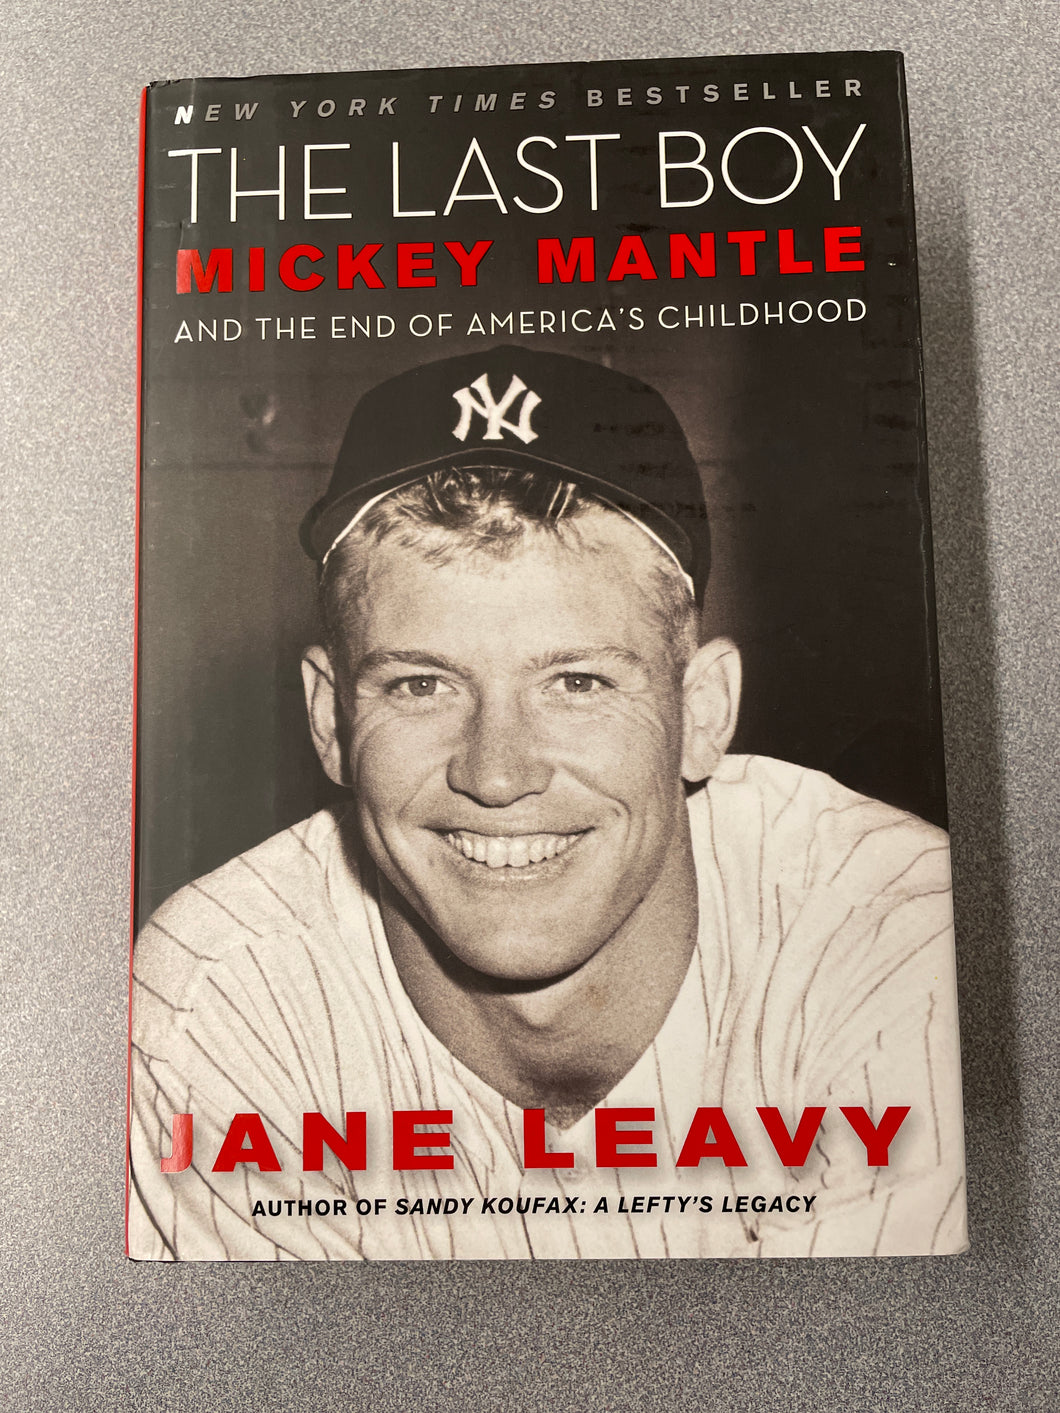 The Last Boy: Mickey Mantle and the End of America's Childhood, Leavy, Jane [2010] BI 11/23